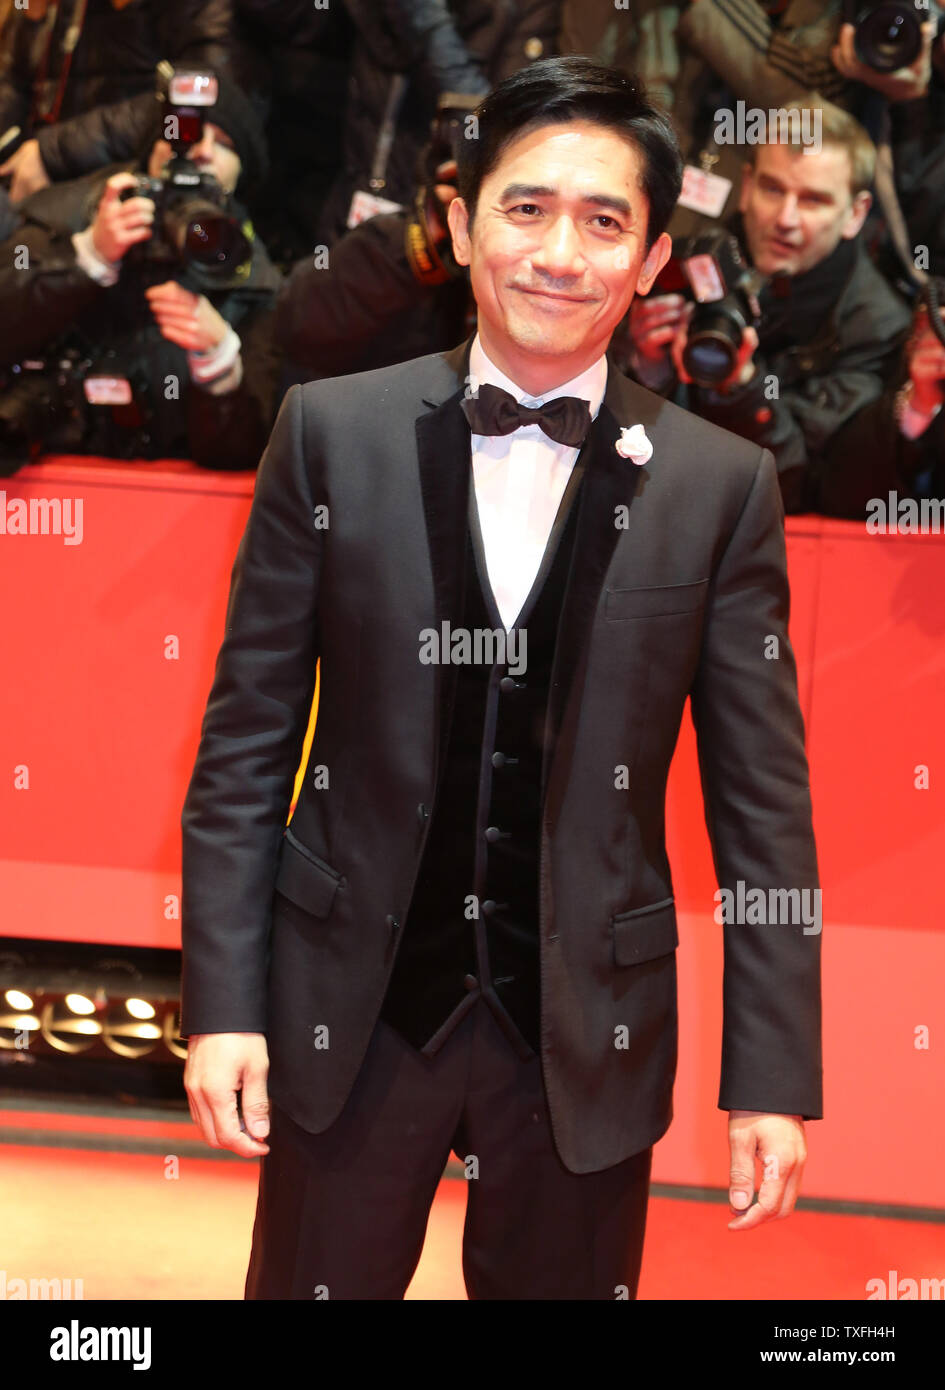 Tony Leung Chiu Wai arrives on the red carpet for the film 'The Grandmaster' during the opening of the 63rd Berlinale Film Festival in Berlin on February 7, 2013.   UPI/David Silpa Stock Photo